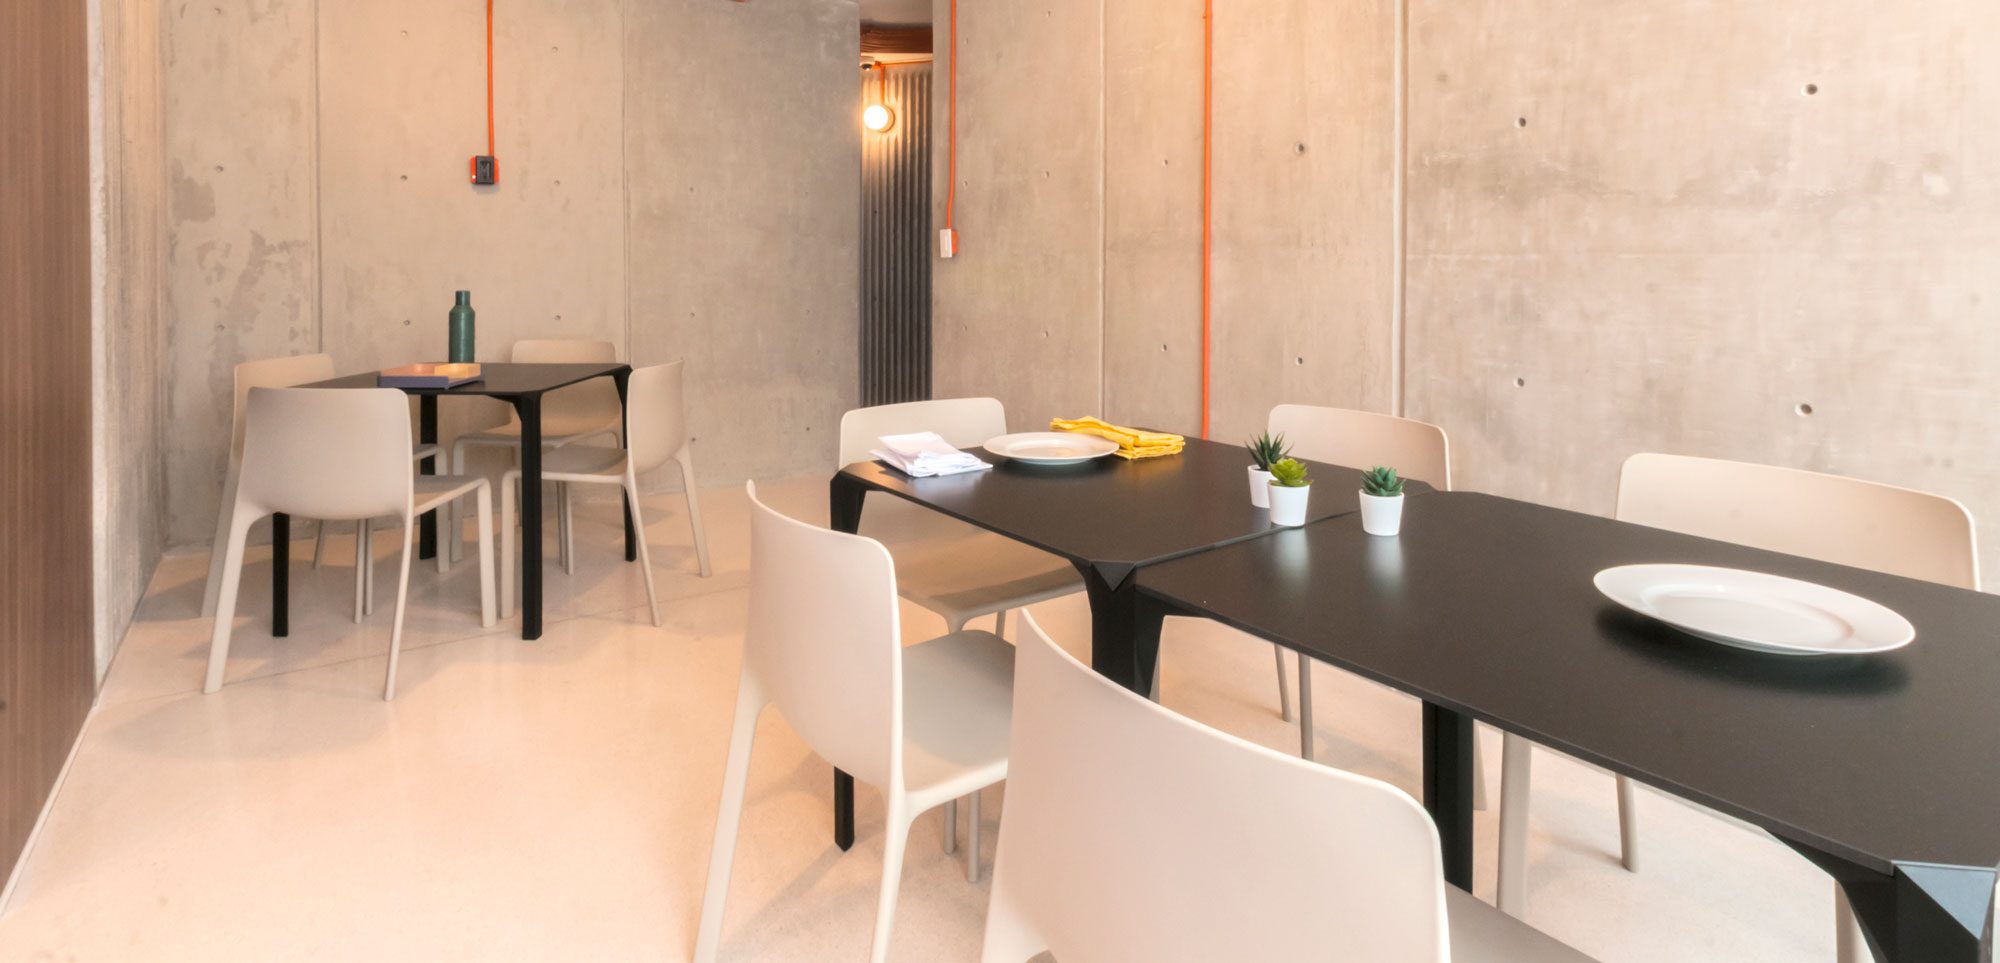 Indoor furniture: Kes chairs and Quartz table, hospitality furniture by Vondom